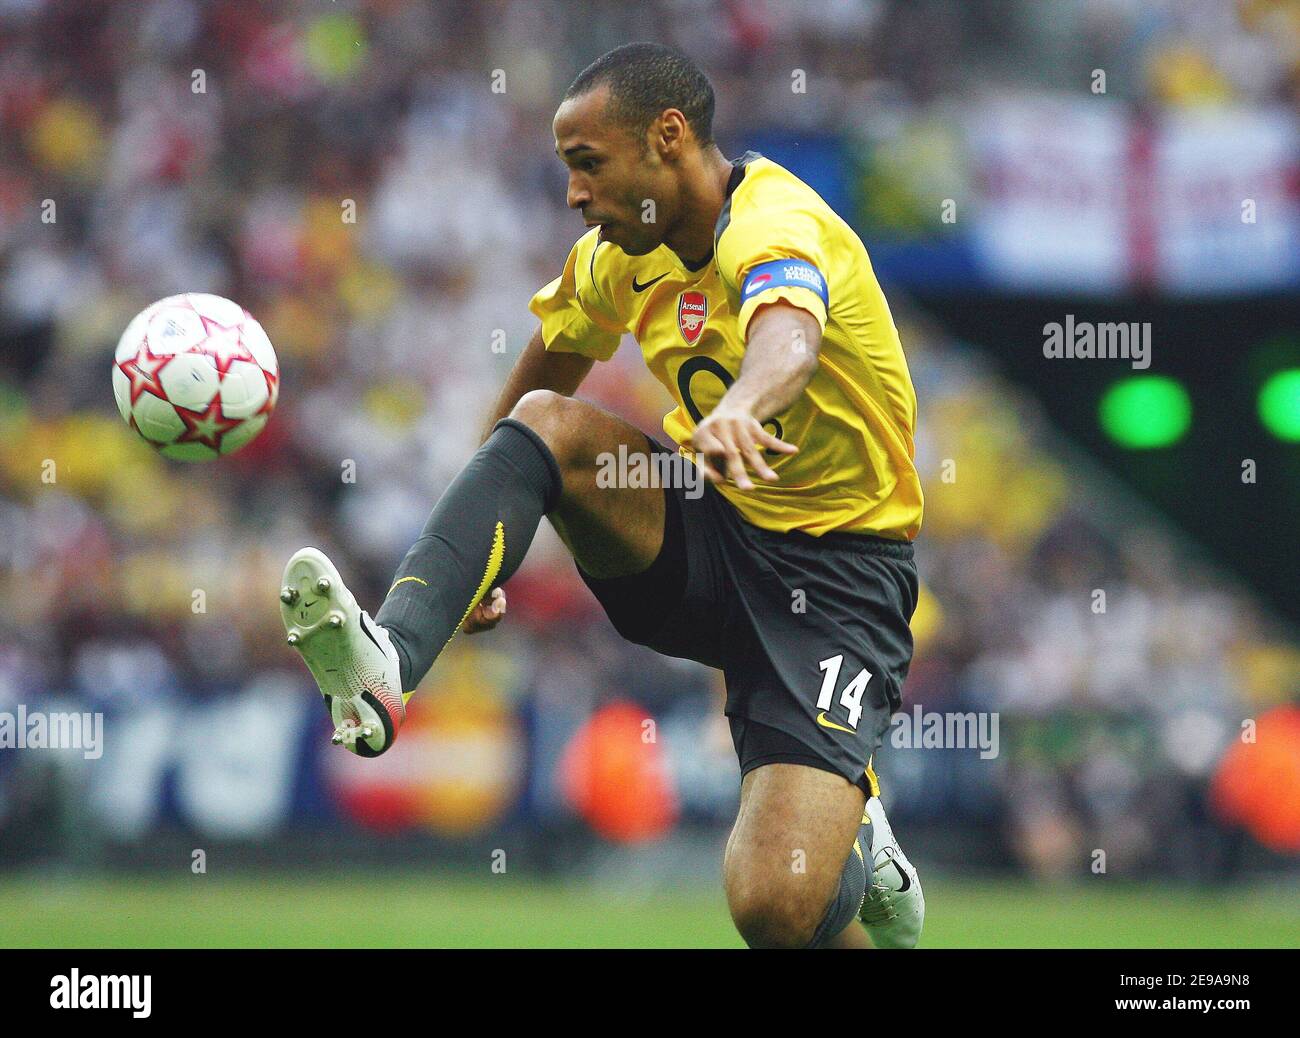 Arsenal's Thierry Henry in action during the Champions League final,  Barcelona vs Arsenal, at the Stade de France, in Saint Denis, near Paris,  France, on May 17, 2006. Barcelona won 2-1. Photo